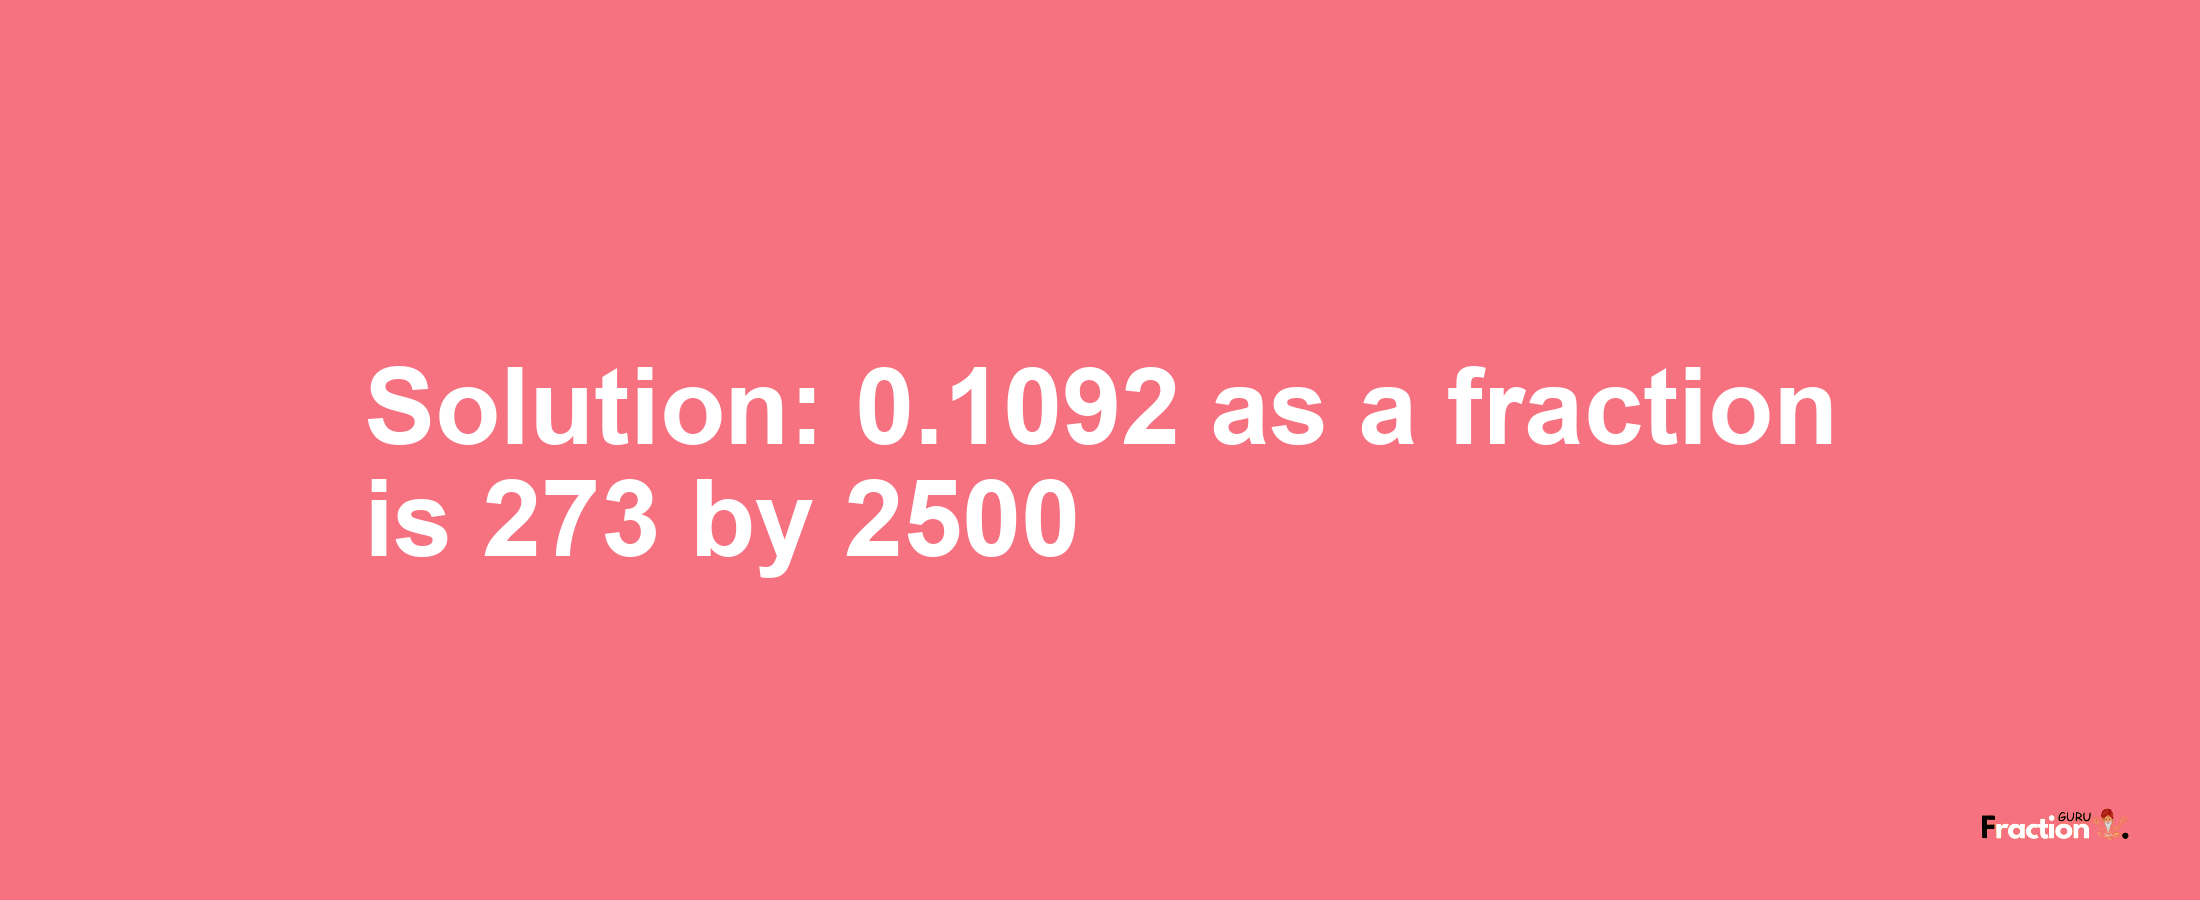 Solution:0.1092 as a fraction is 273/2500